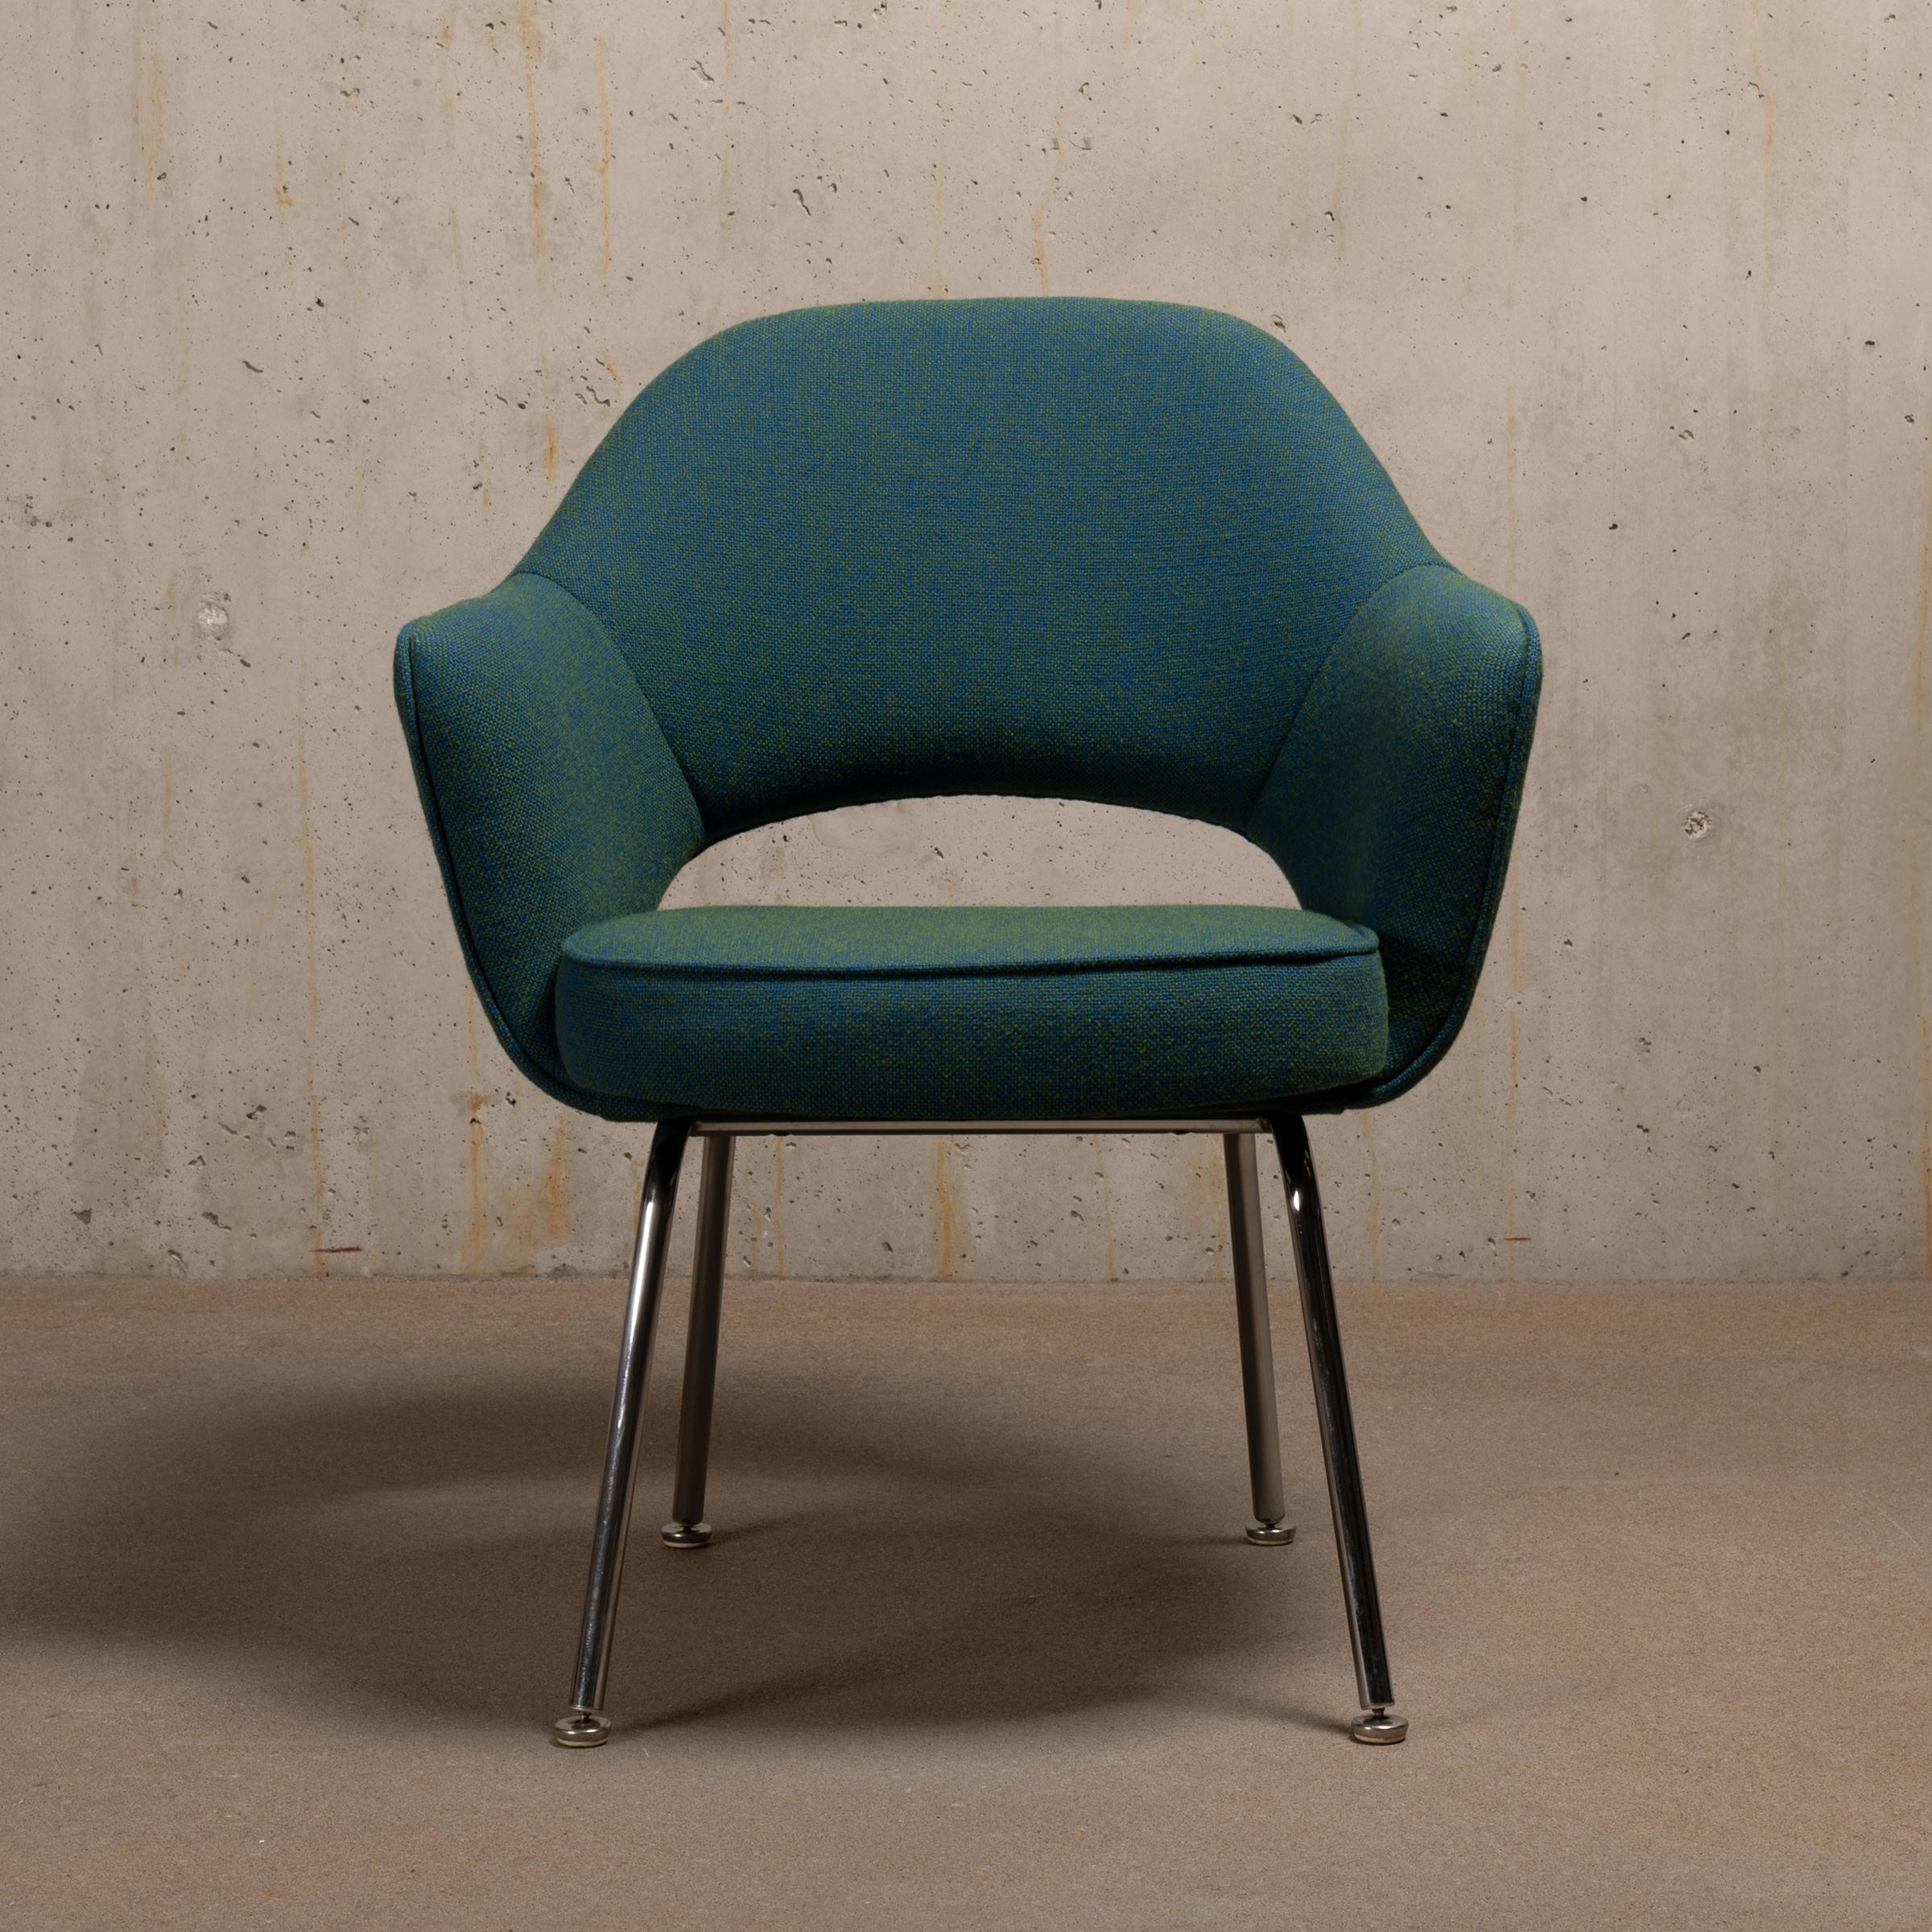 Comfortable and iconic Saarinen executive chairs for Knoll / De Coene. De Coene was a Belgian manufacturer located in Kortrijk which, as from 1954, had the exclusive rights for production and selling Knoll furniture in the Benelux. Chairs are in